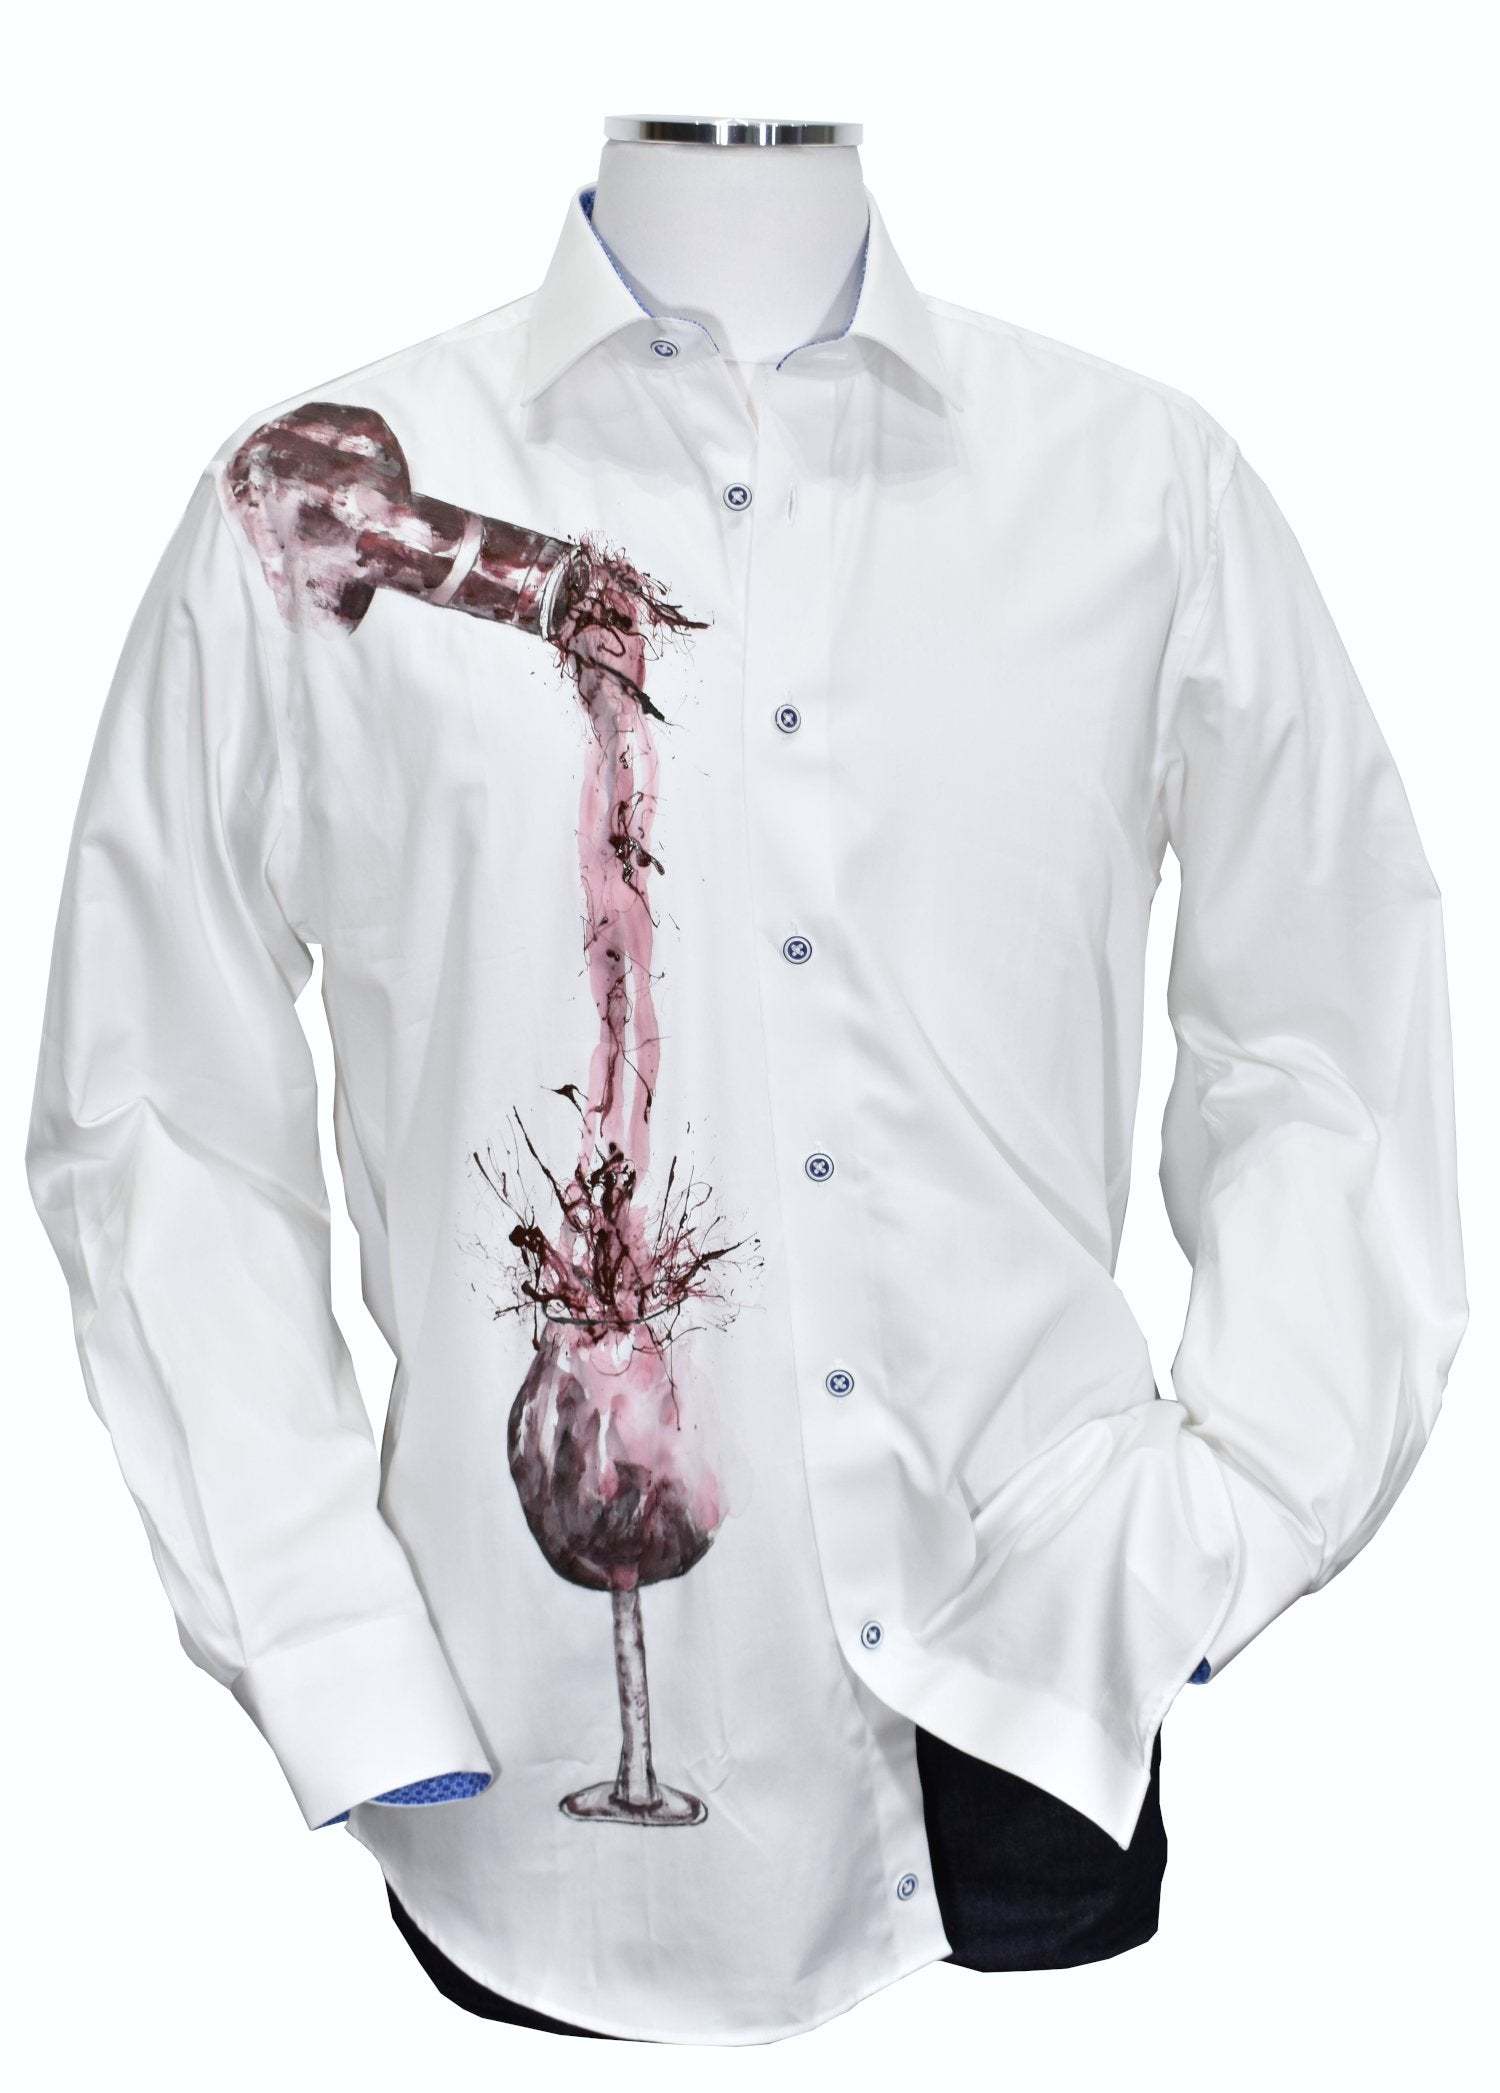 Be unique and stand out with this one-of-a-kind Marcello Hand Painted Bourbon shirt. Crafted with luxurious cotton sateen fabric for a soft feel, its exclusive hand painted design will have heads turning. Dare to be bold with this must-have piece!